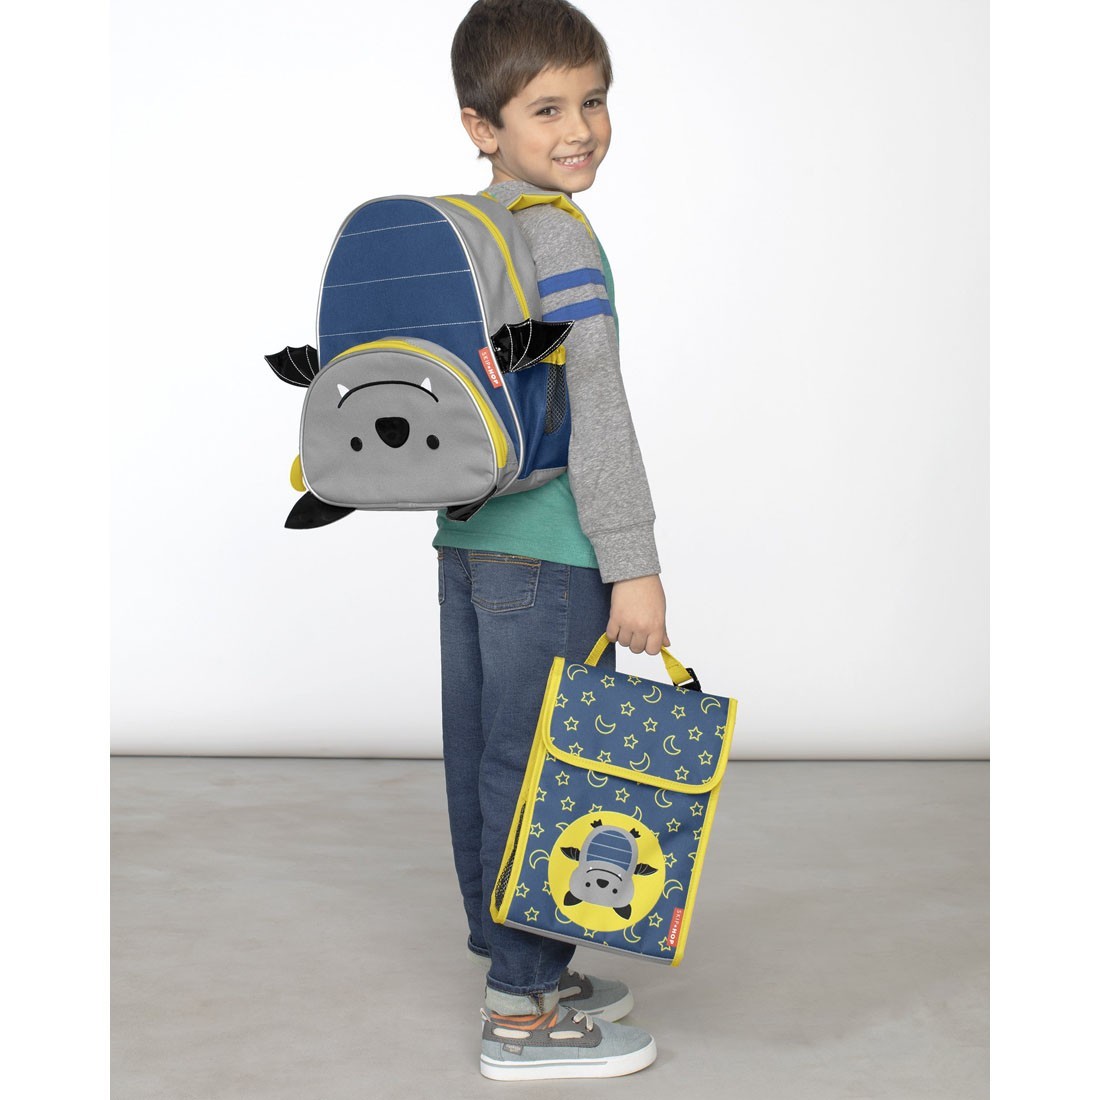 https://theoutfit.me/30723-thickbox_default/skip-hop-zoo-insulated-kids-lunch-bag-bat.jpg